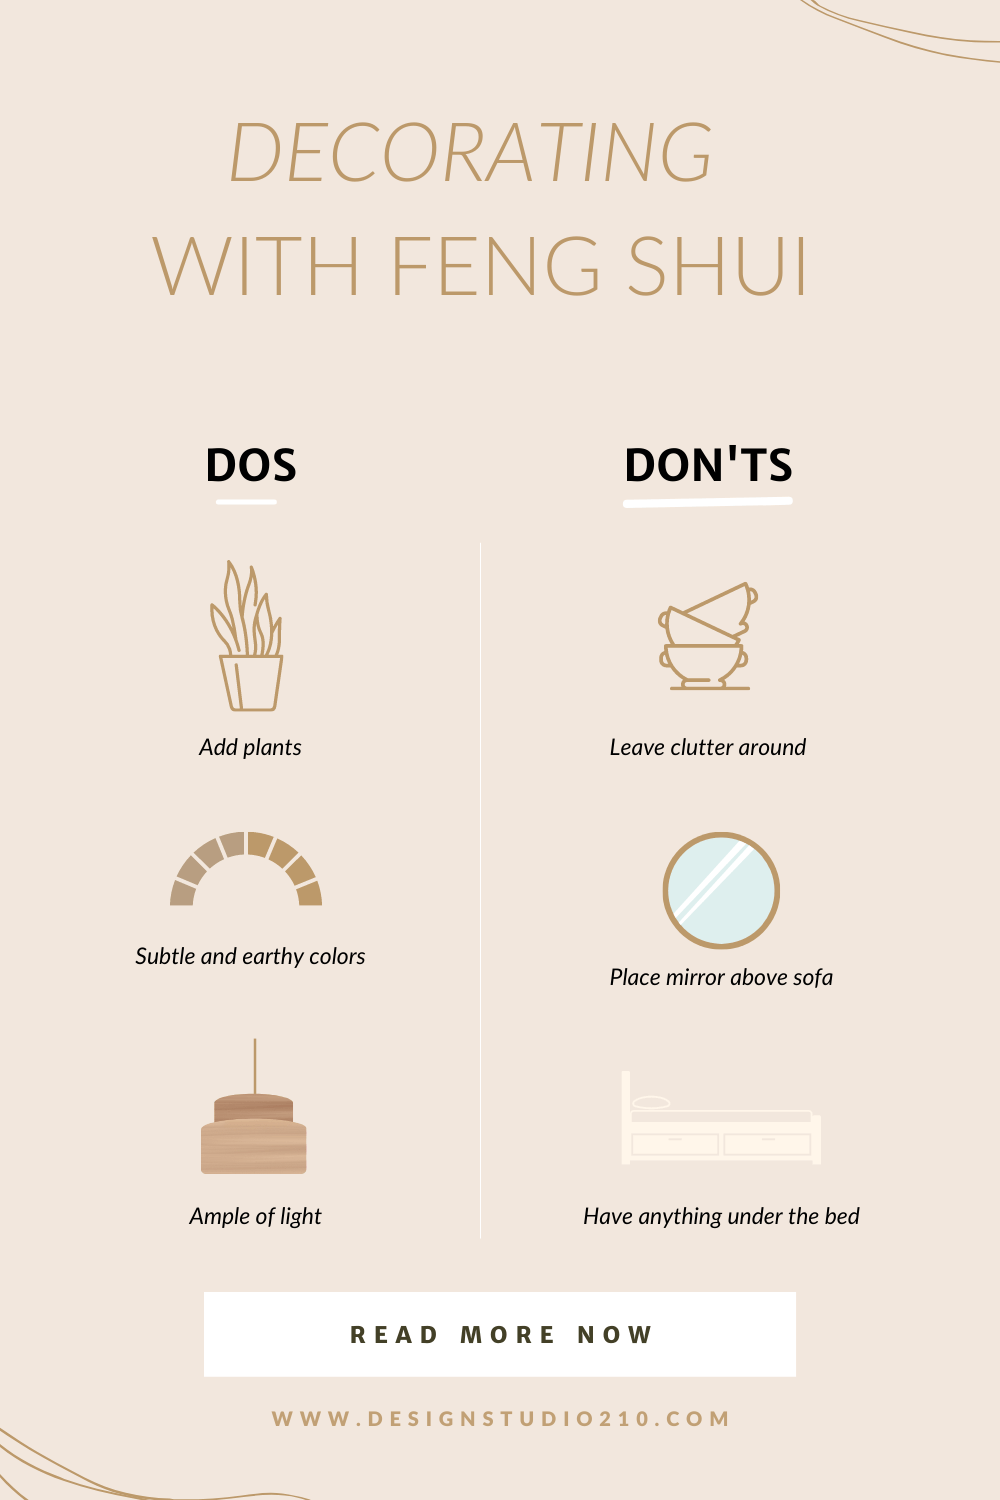 The Real Way to Feng Shui